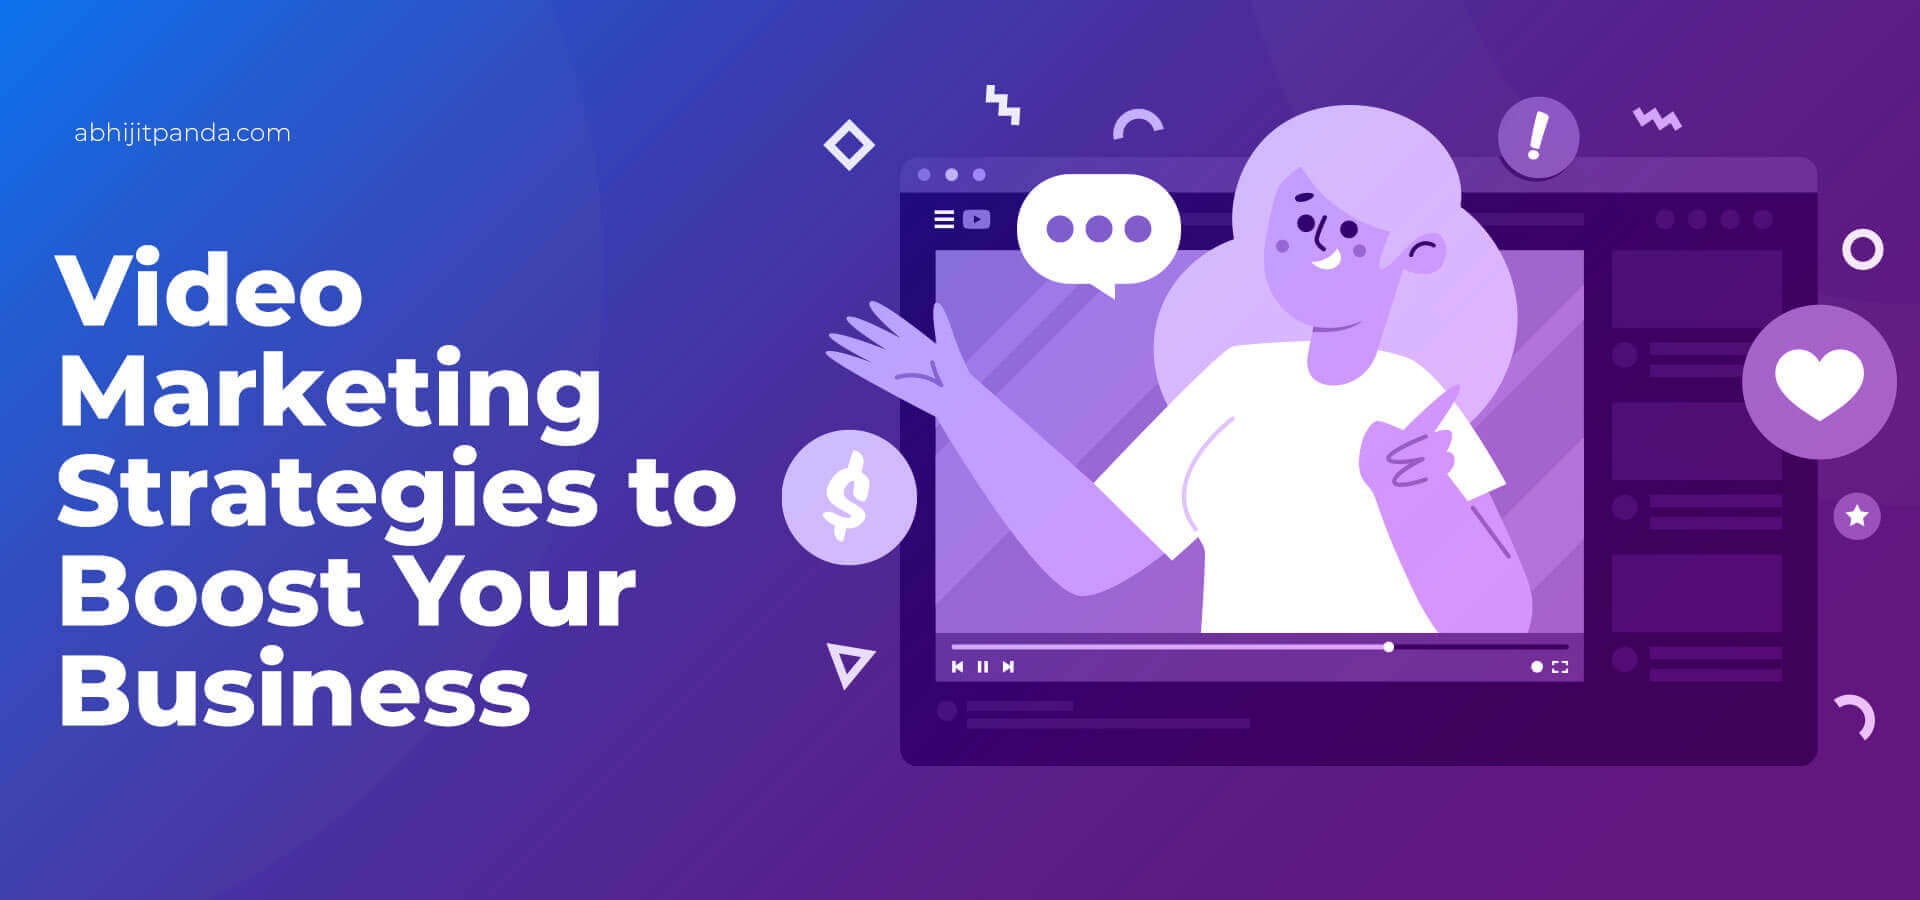 Video Marketing Strategies To Boost Your Business In 2021 Abhijit Panda